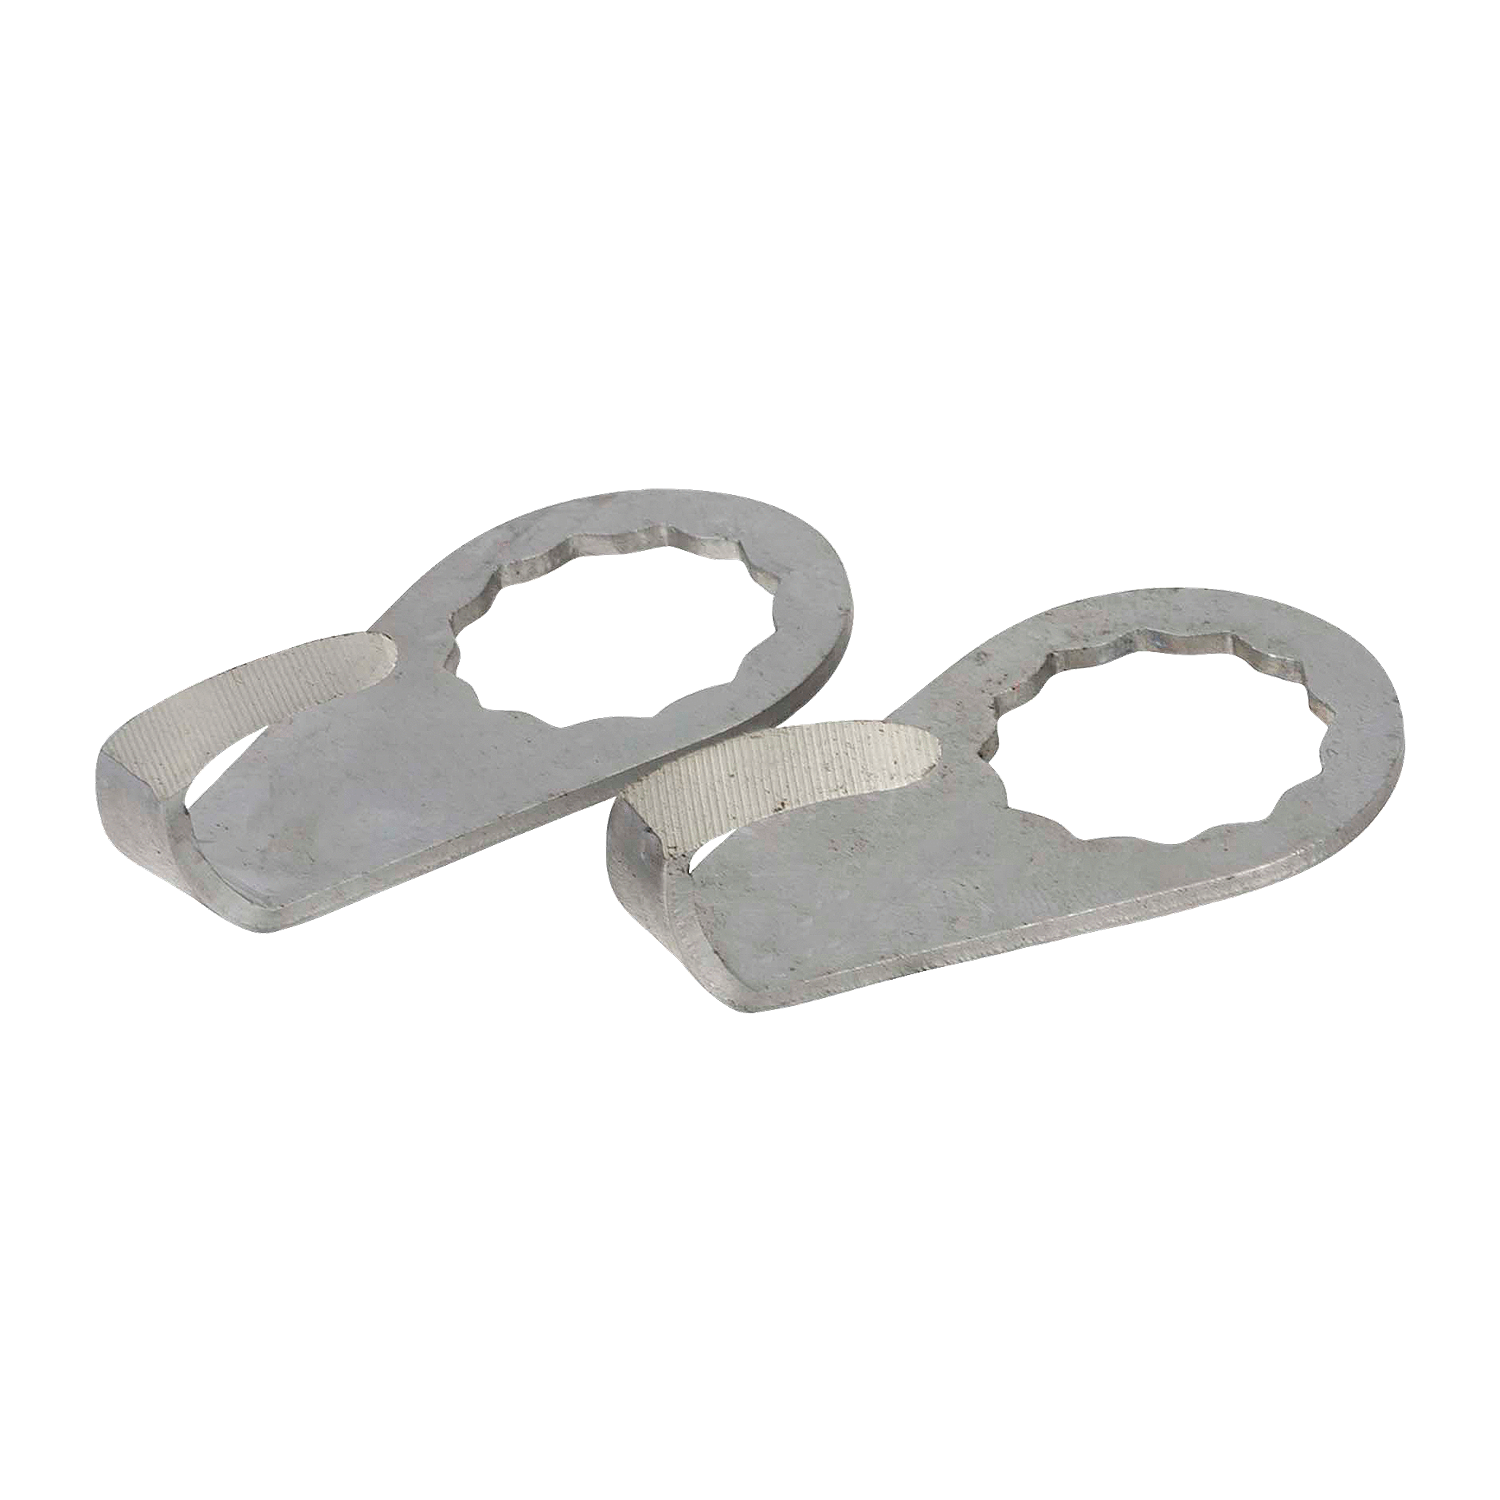 BAHCO BPBU U Shaped Blade - 2 Pcs/Blister Pack (BAHCO Tools) - Premium Shaped Blade from BAHCO - Shop now at Yew Aik.